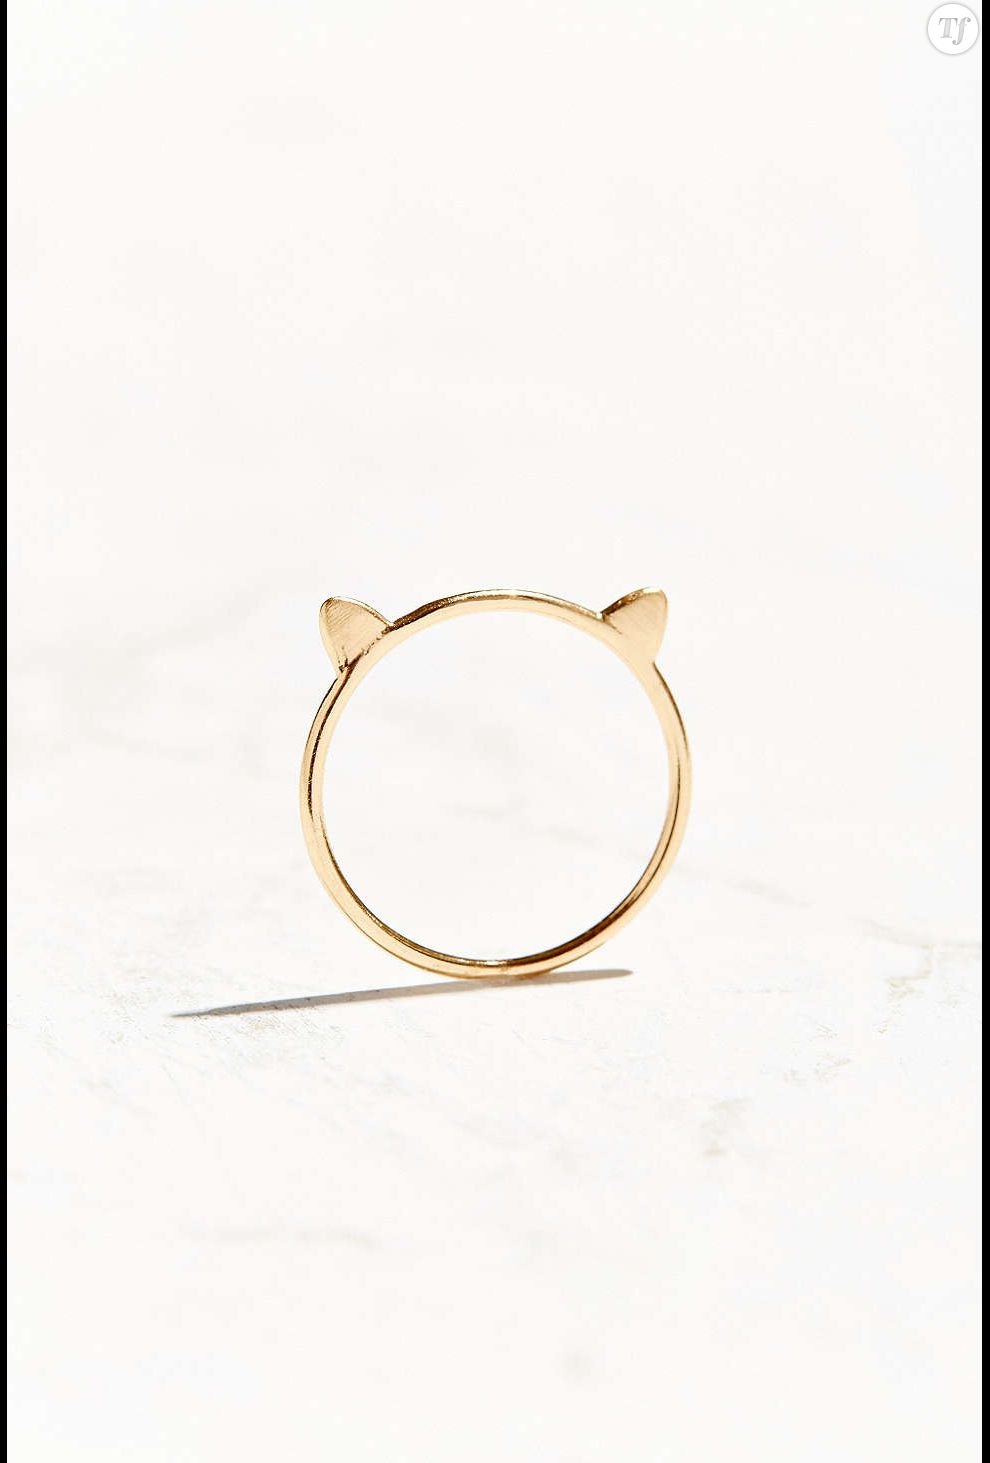  Bague Urban Outfitters, 10$ 